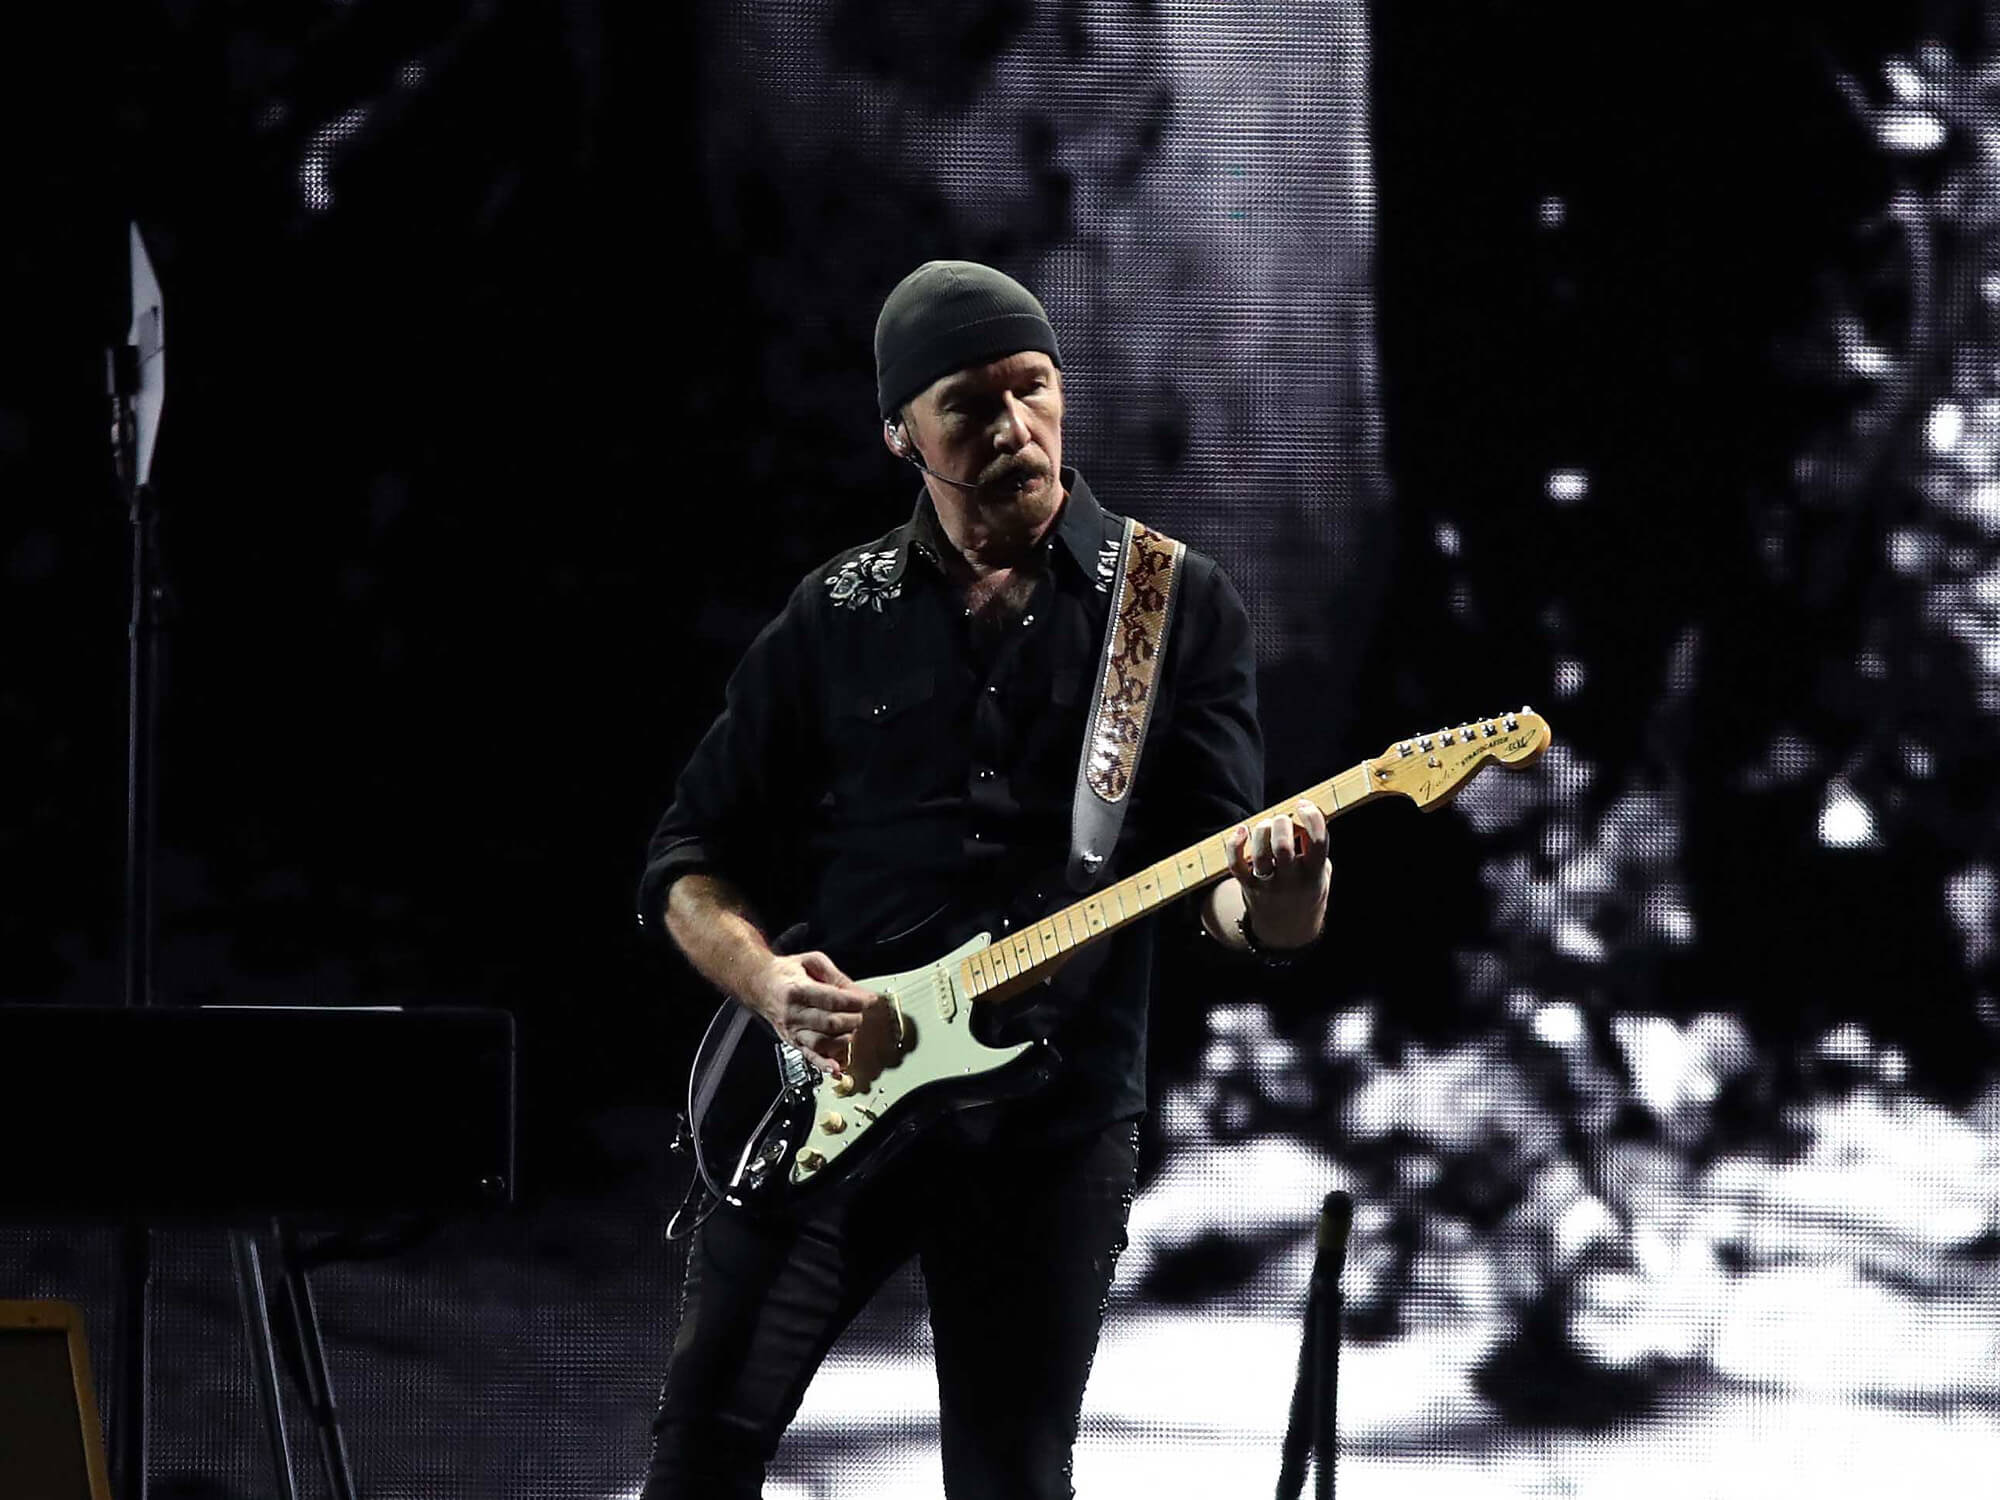 The Edge playing a Stratocaster on stage. There is a small amount of lighting shining on him and the background is dark.